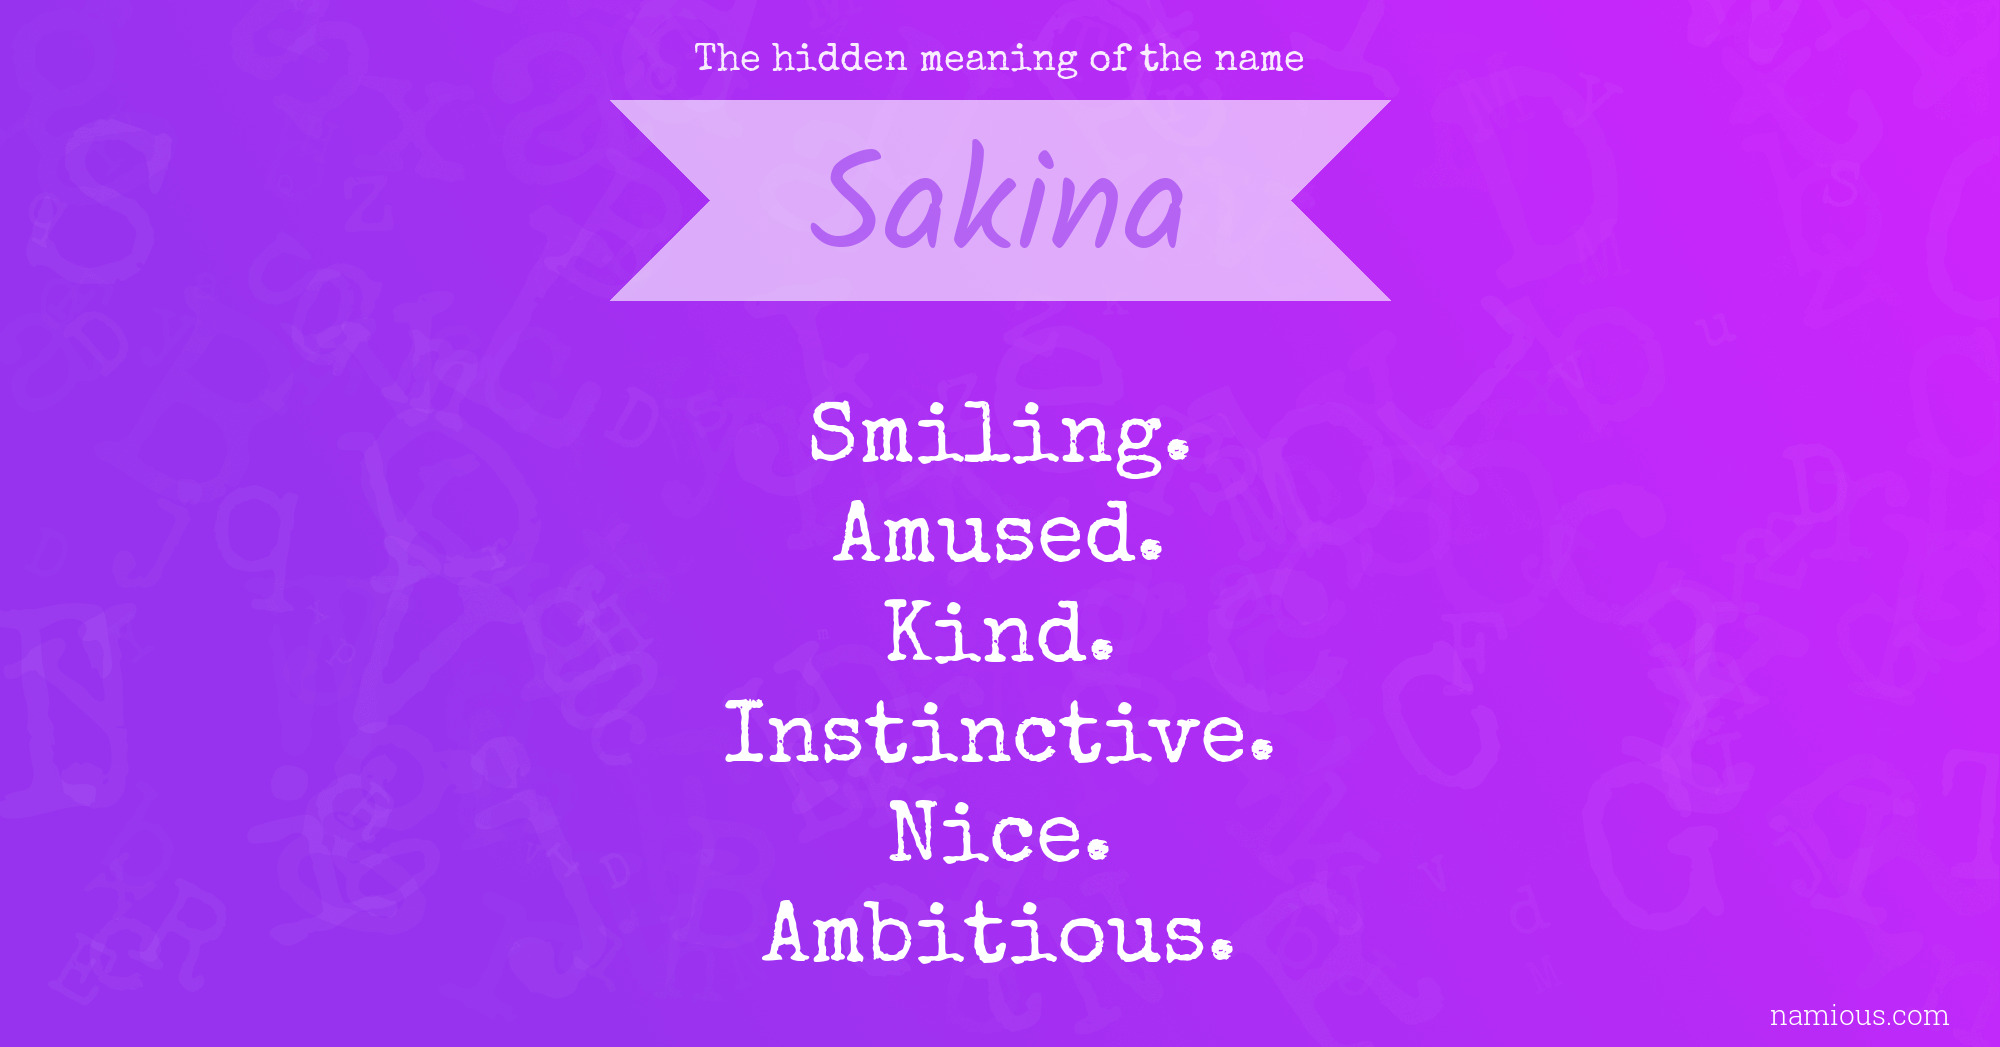 The hidden meaning of the name Sakina